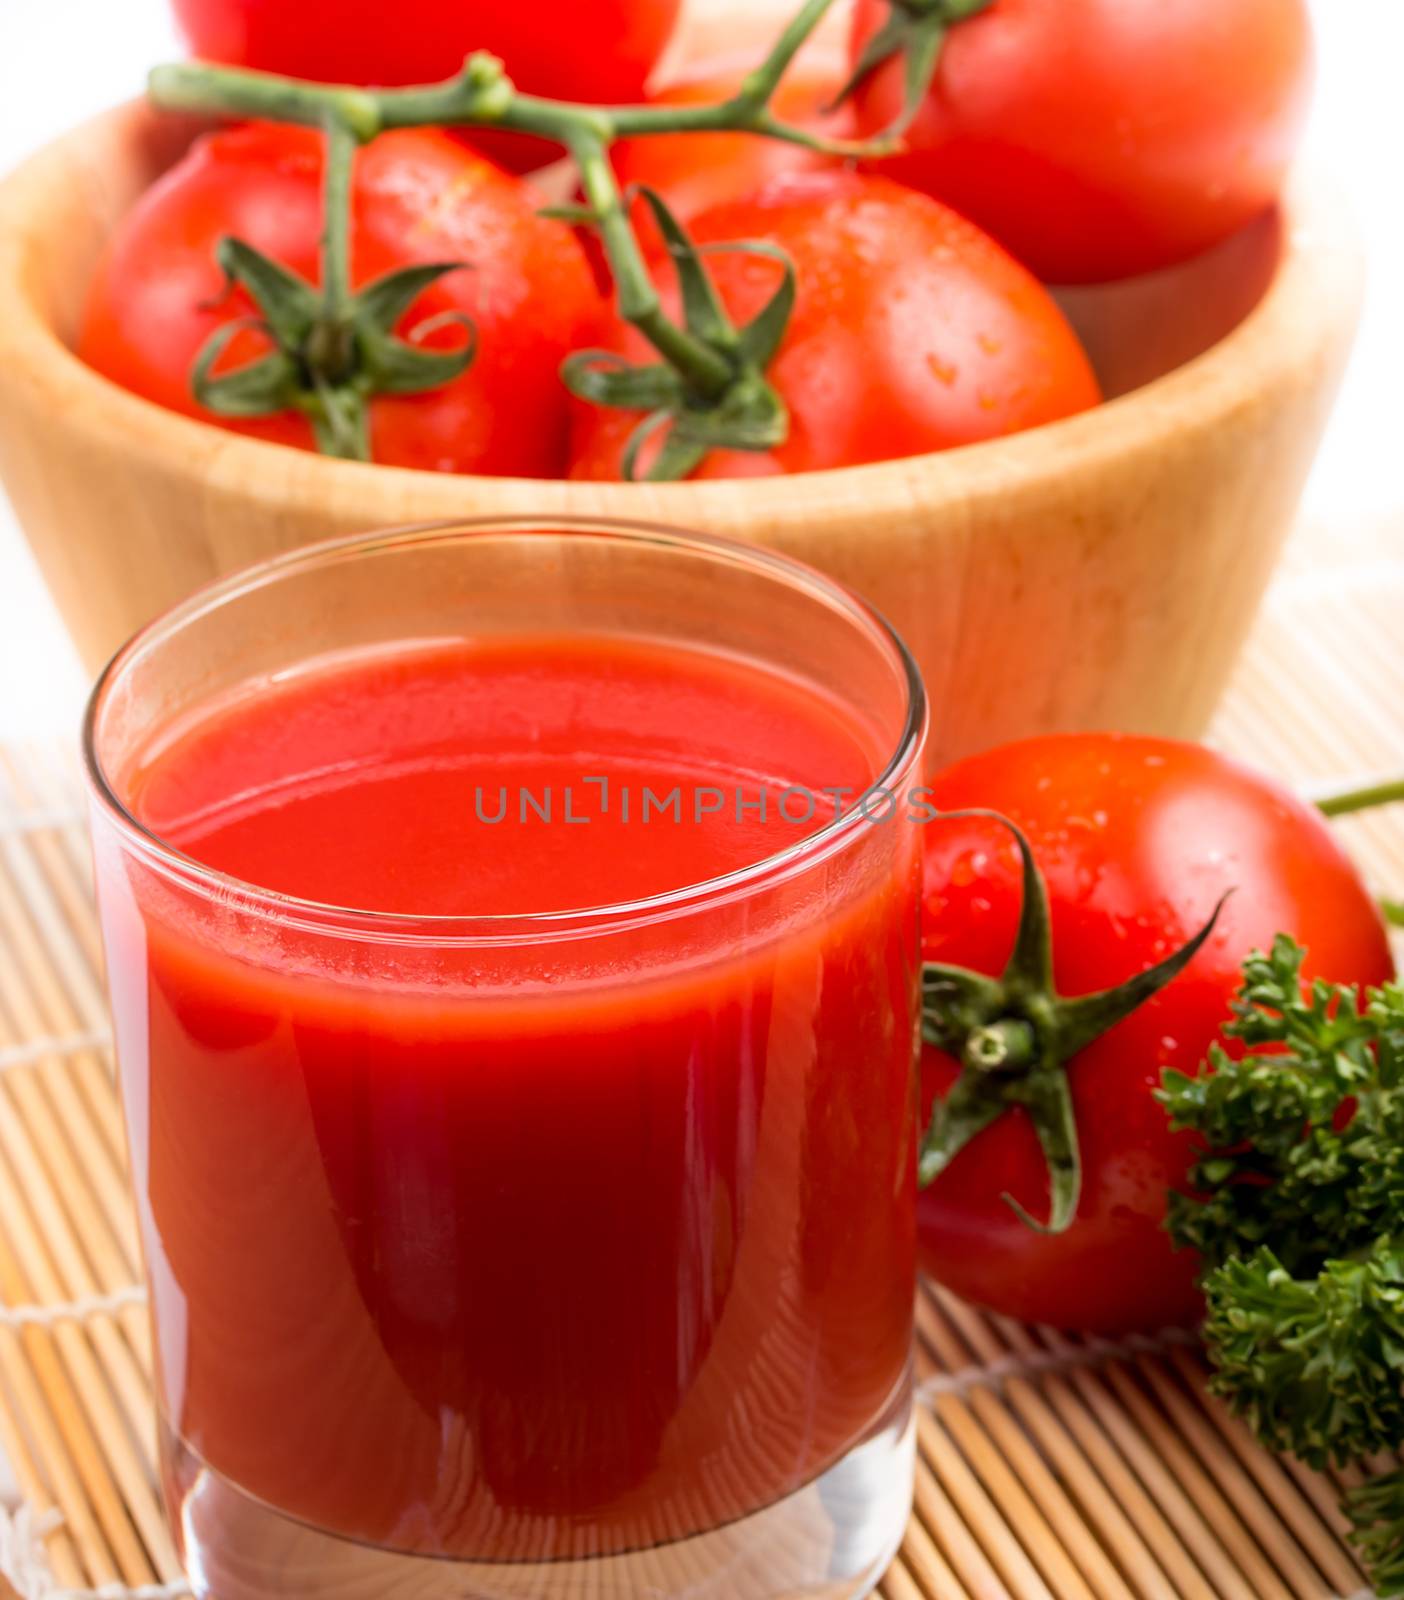 Tomatoes And Juice Indicating Refresh Beverage And Thirsty